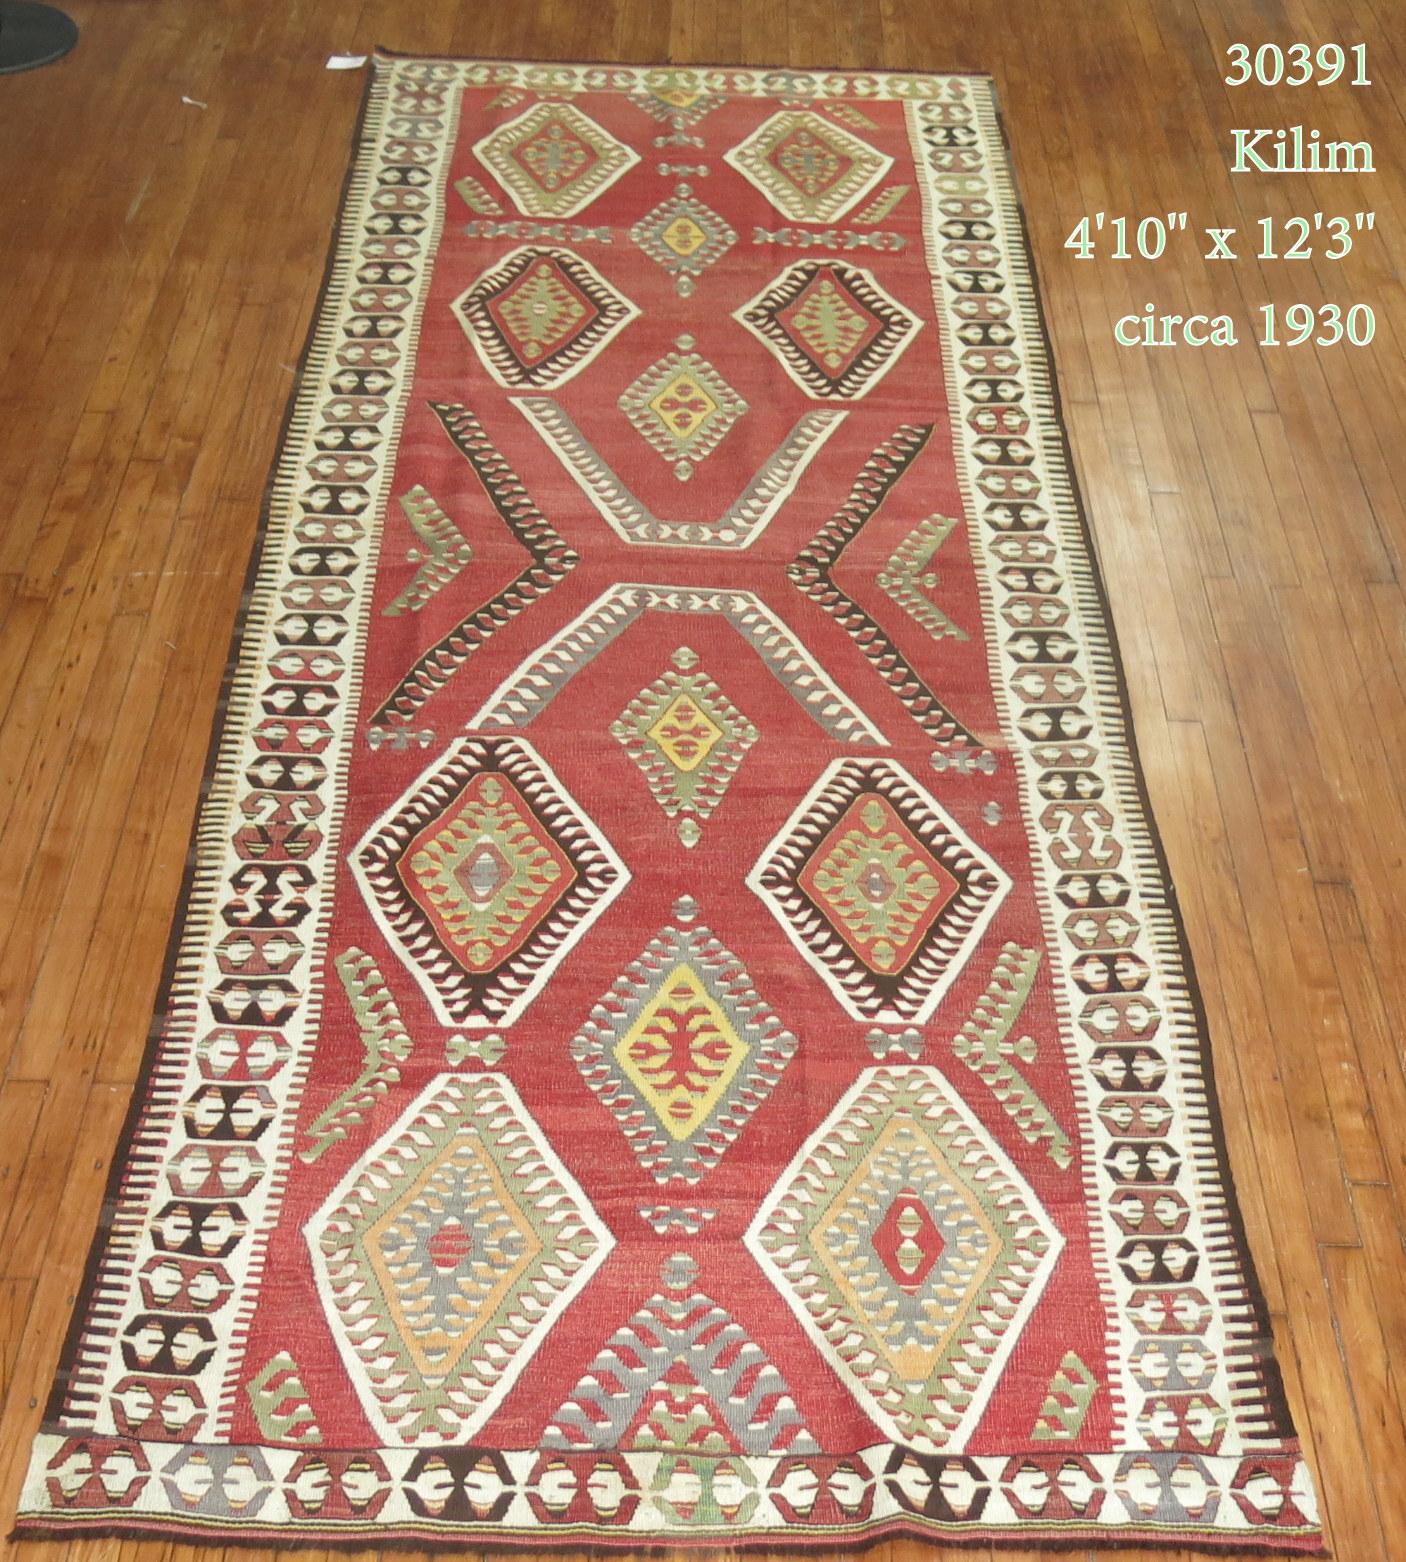 Early 20th century tribal geometric wide gallery size runner 

Measures: 4'10